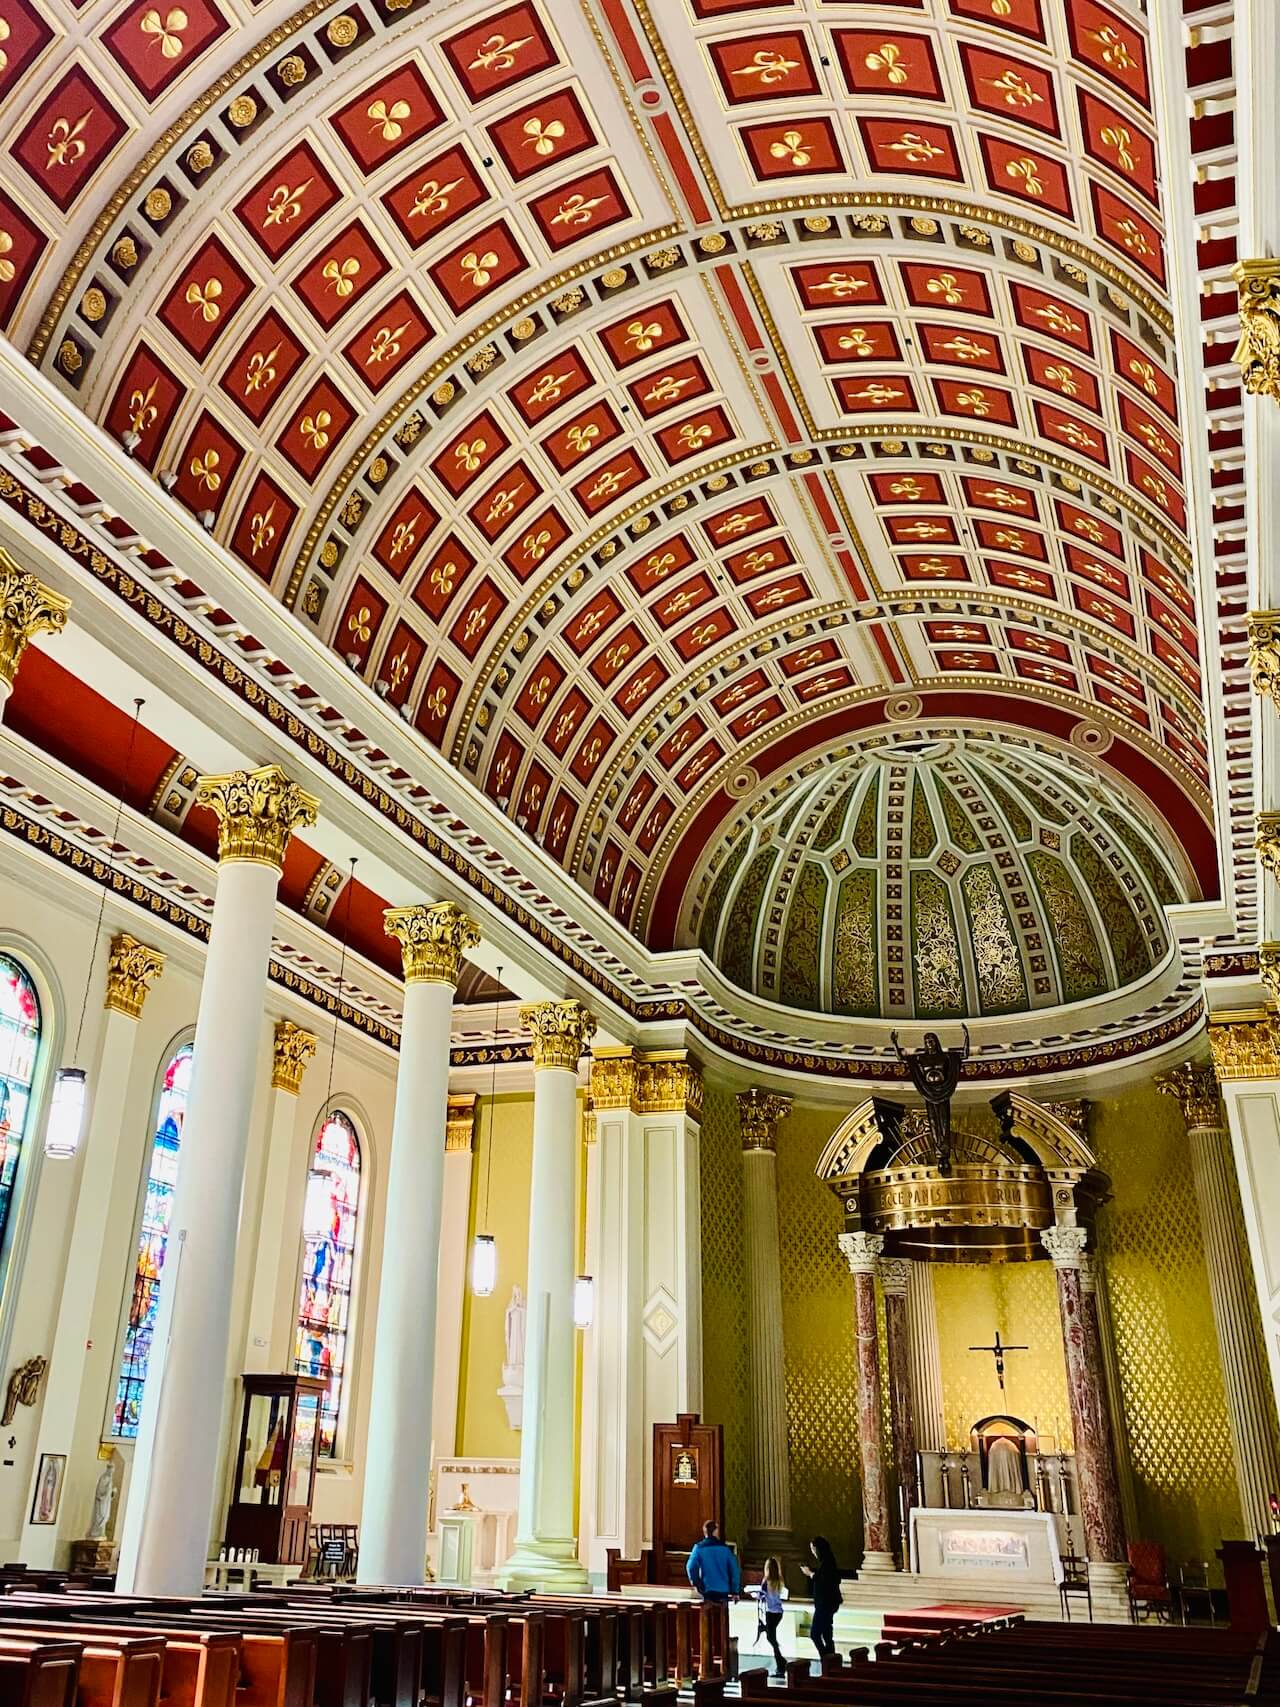 Cathedral of the immaculate conception interior